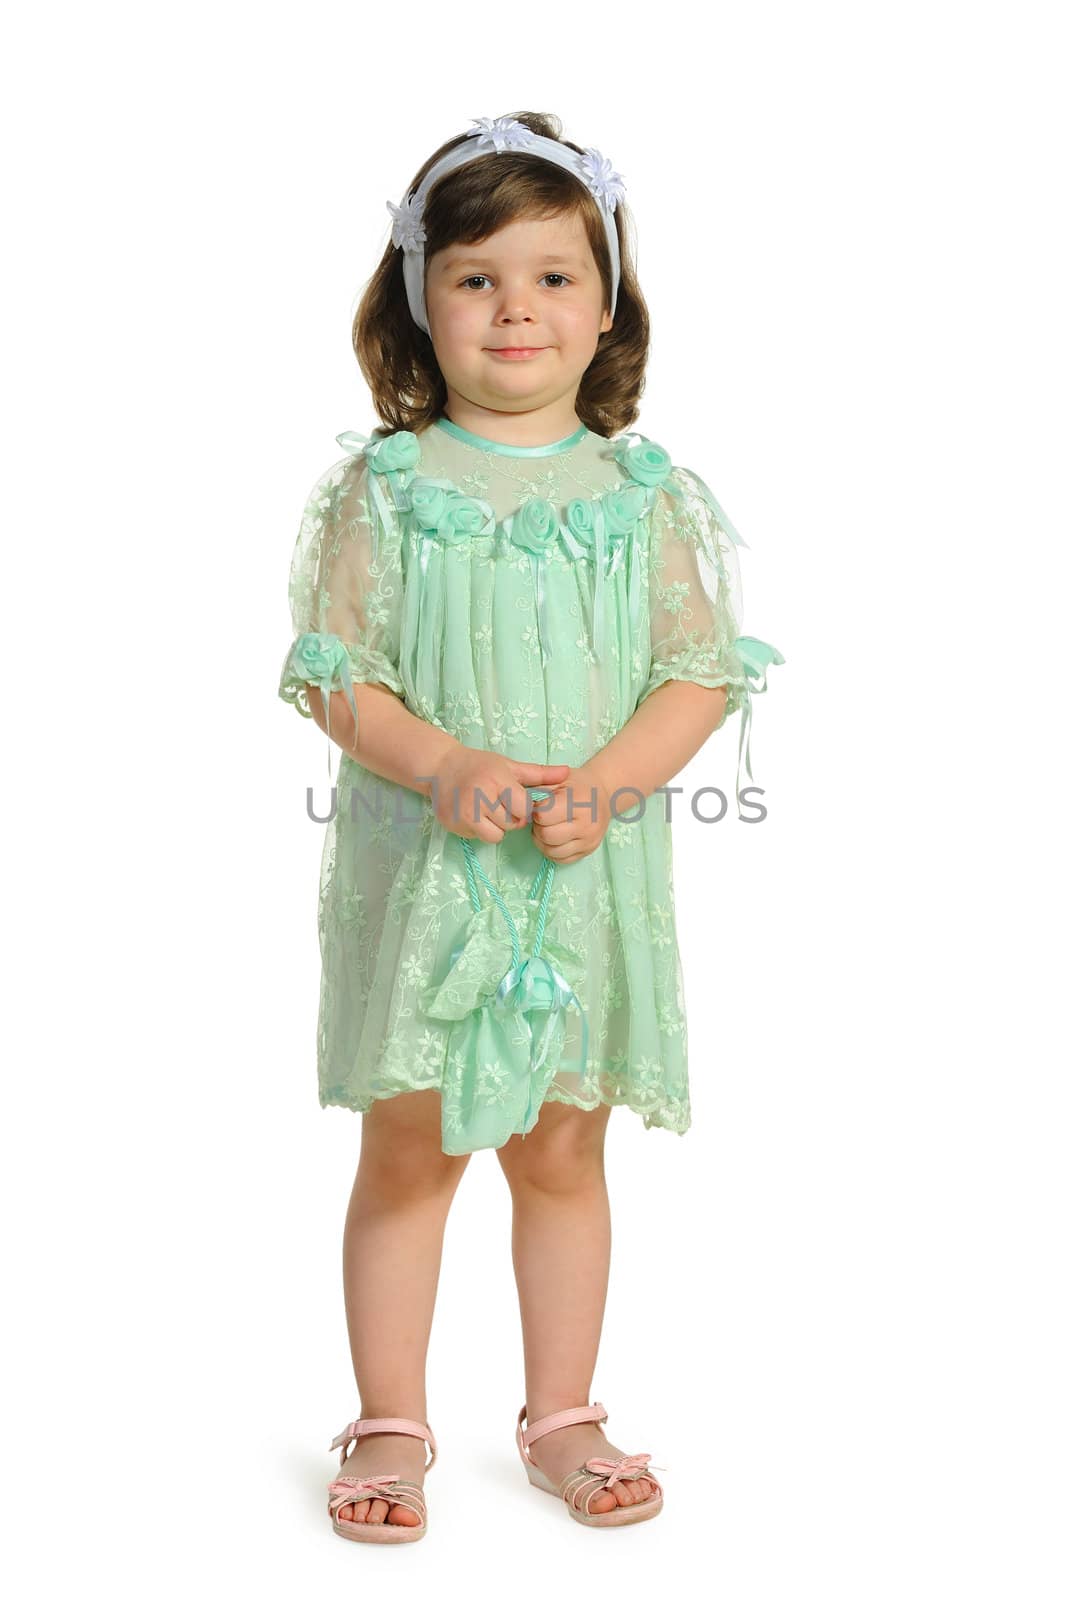 The lovely little girl in a green dress by galdzer